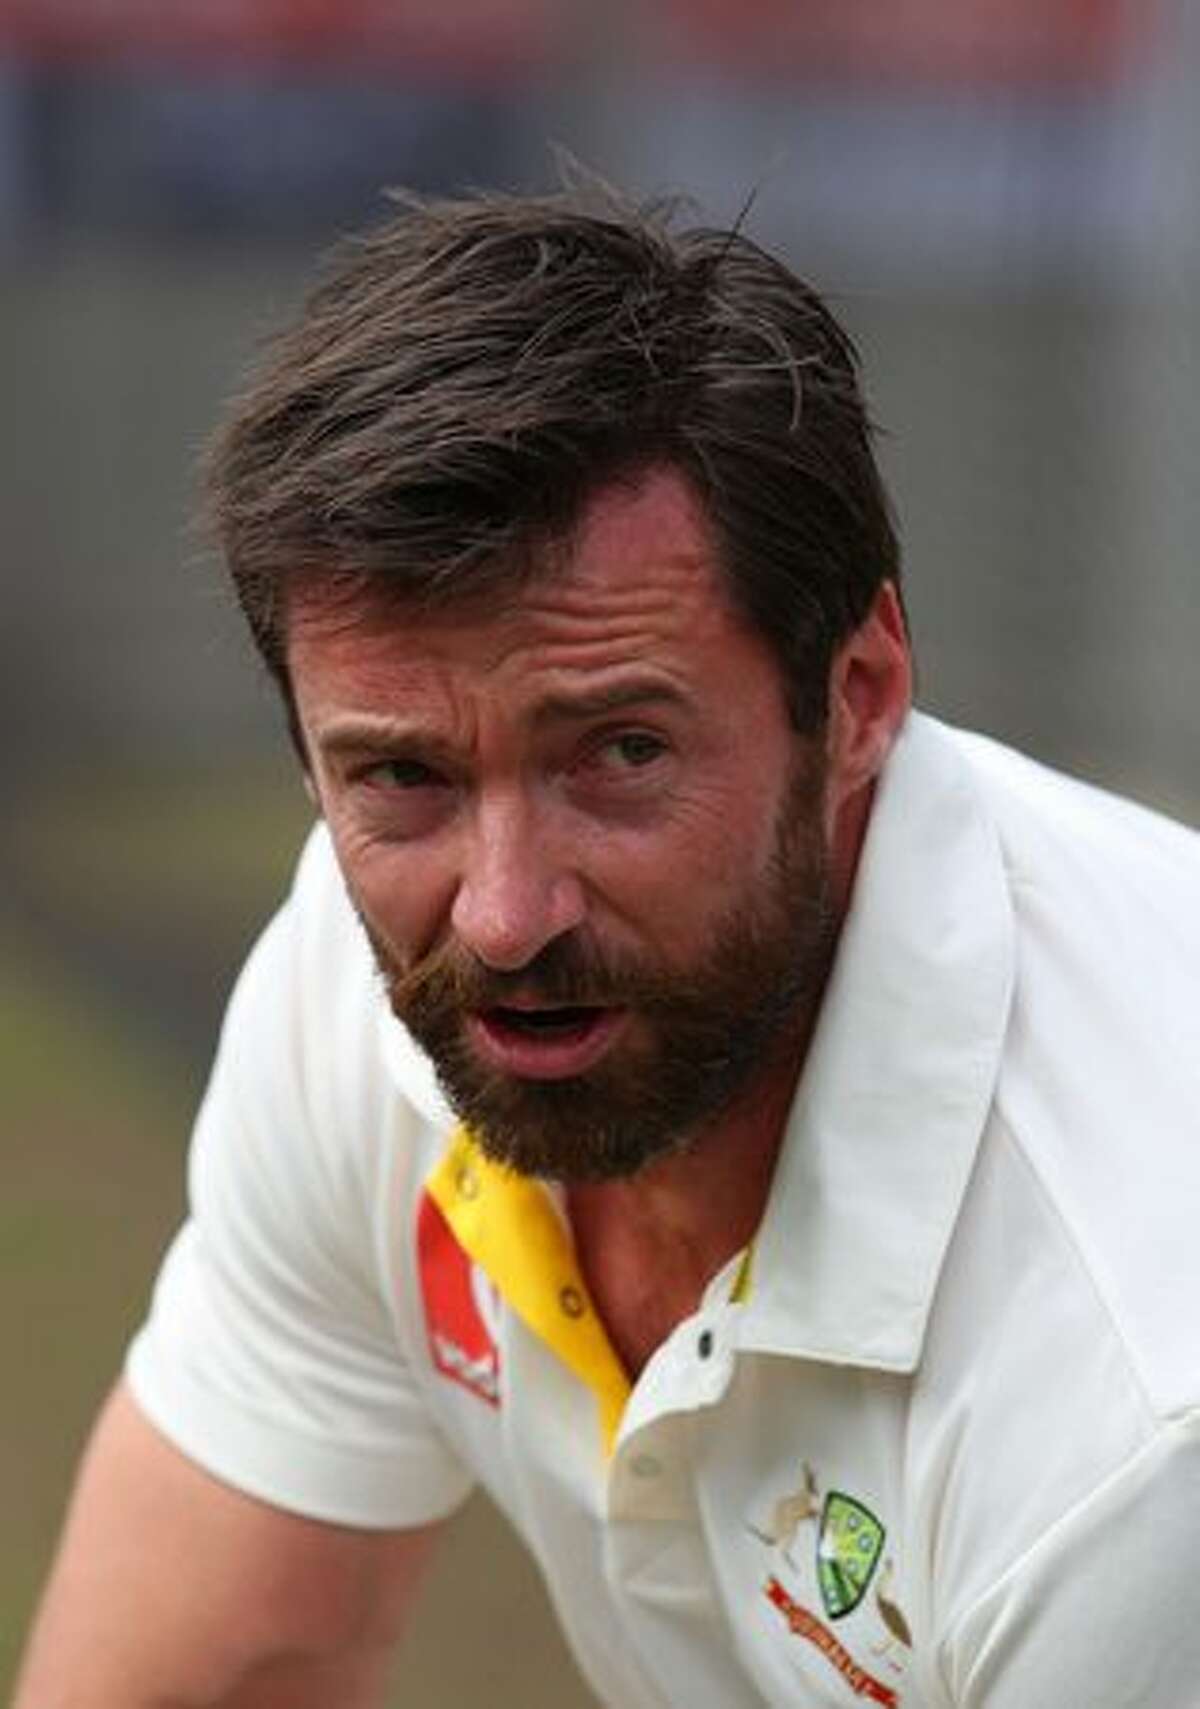 Actor Hugh Jackman looks on after playing cricket in the nets during day one of the Fourth Test match between Australia and England at Melbourne Cricket Ground in Melbourne, Australia.